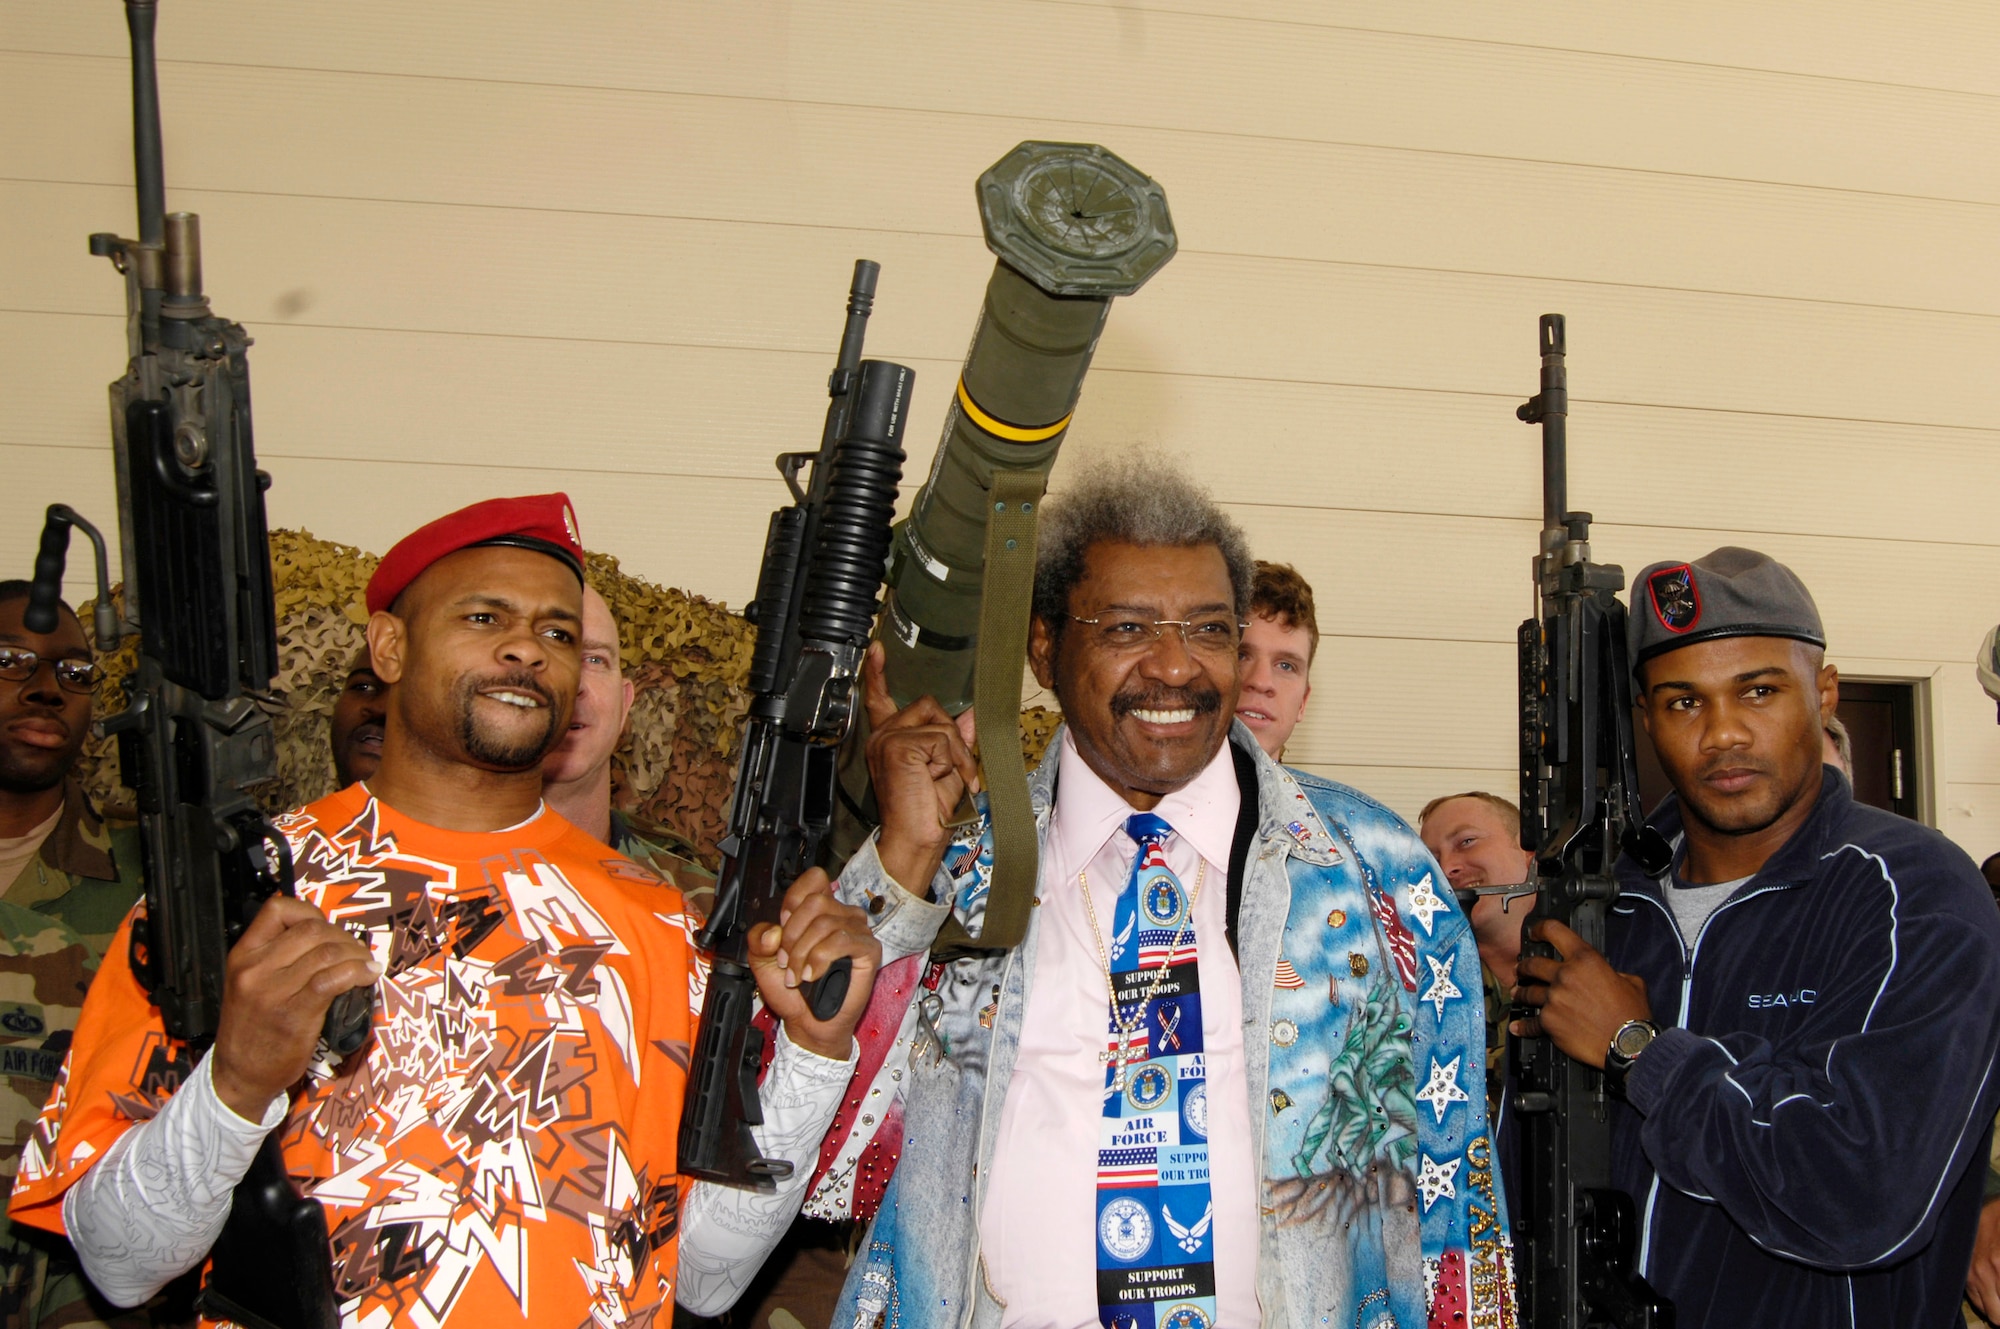 Roy Jones Jr., Don King and Felix Trinidad pose with an M-249, M-203, AT-4 rocket launcher and an M-240 during their visit to the 720th Advanced Skills Training flight Dec. 5 at Hurlburt Field, Fla. The boxers and their promoter visited Hurlburt Field as part of their tour of military installation to show support for military members. (U.S. Air Force photo/Airman 1st Class Sheila deVera) 
